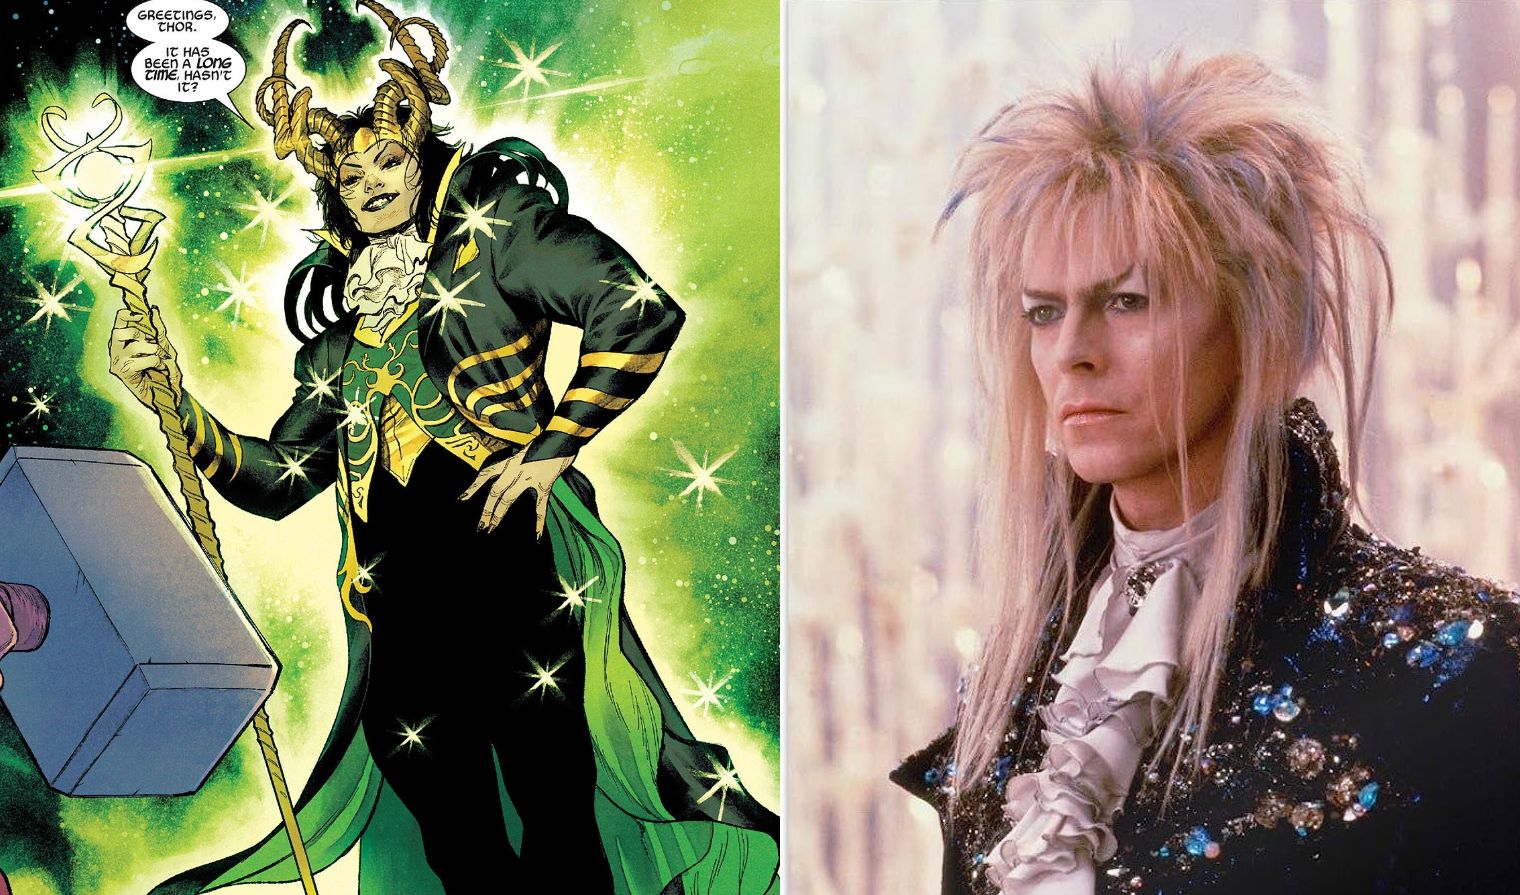 Loki, left, wearing a sparkling coat and cravat; David Bowie, right, in 'Labyrinth,' wearing a gem-bedecked cloak and cravat.